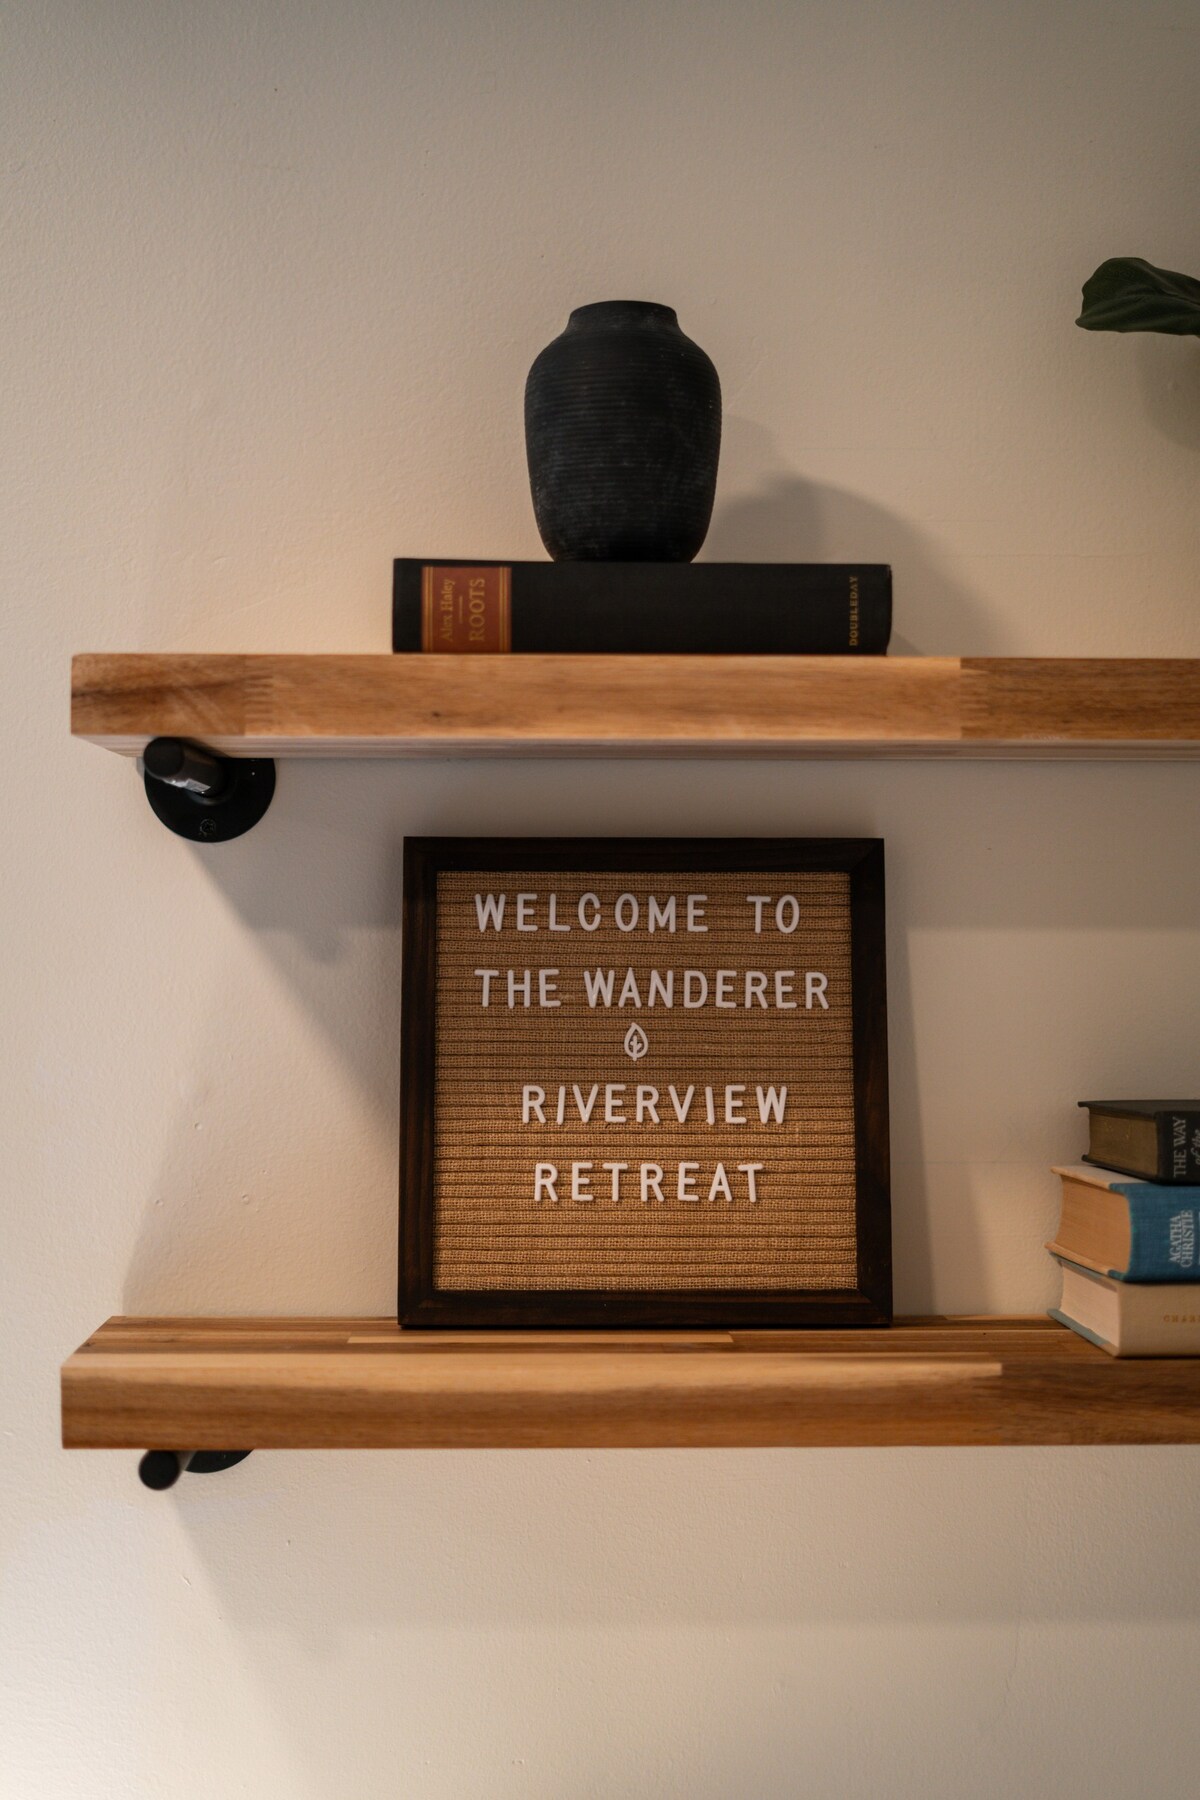 Riverview Retreat at The Wanderer